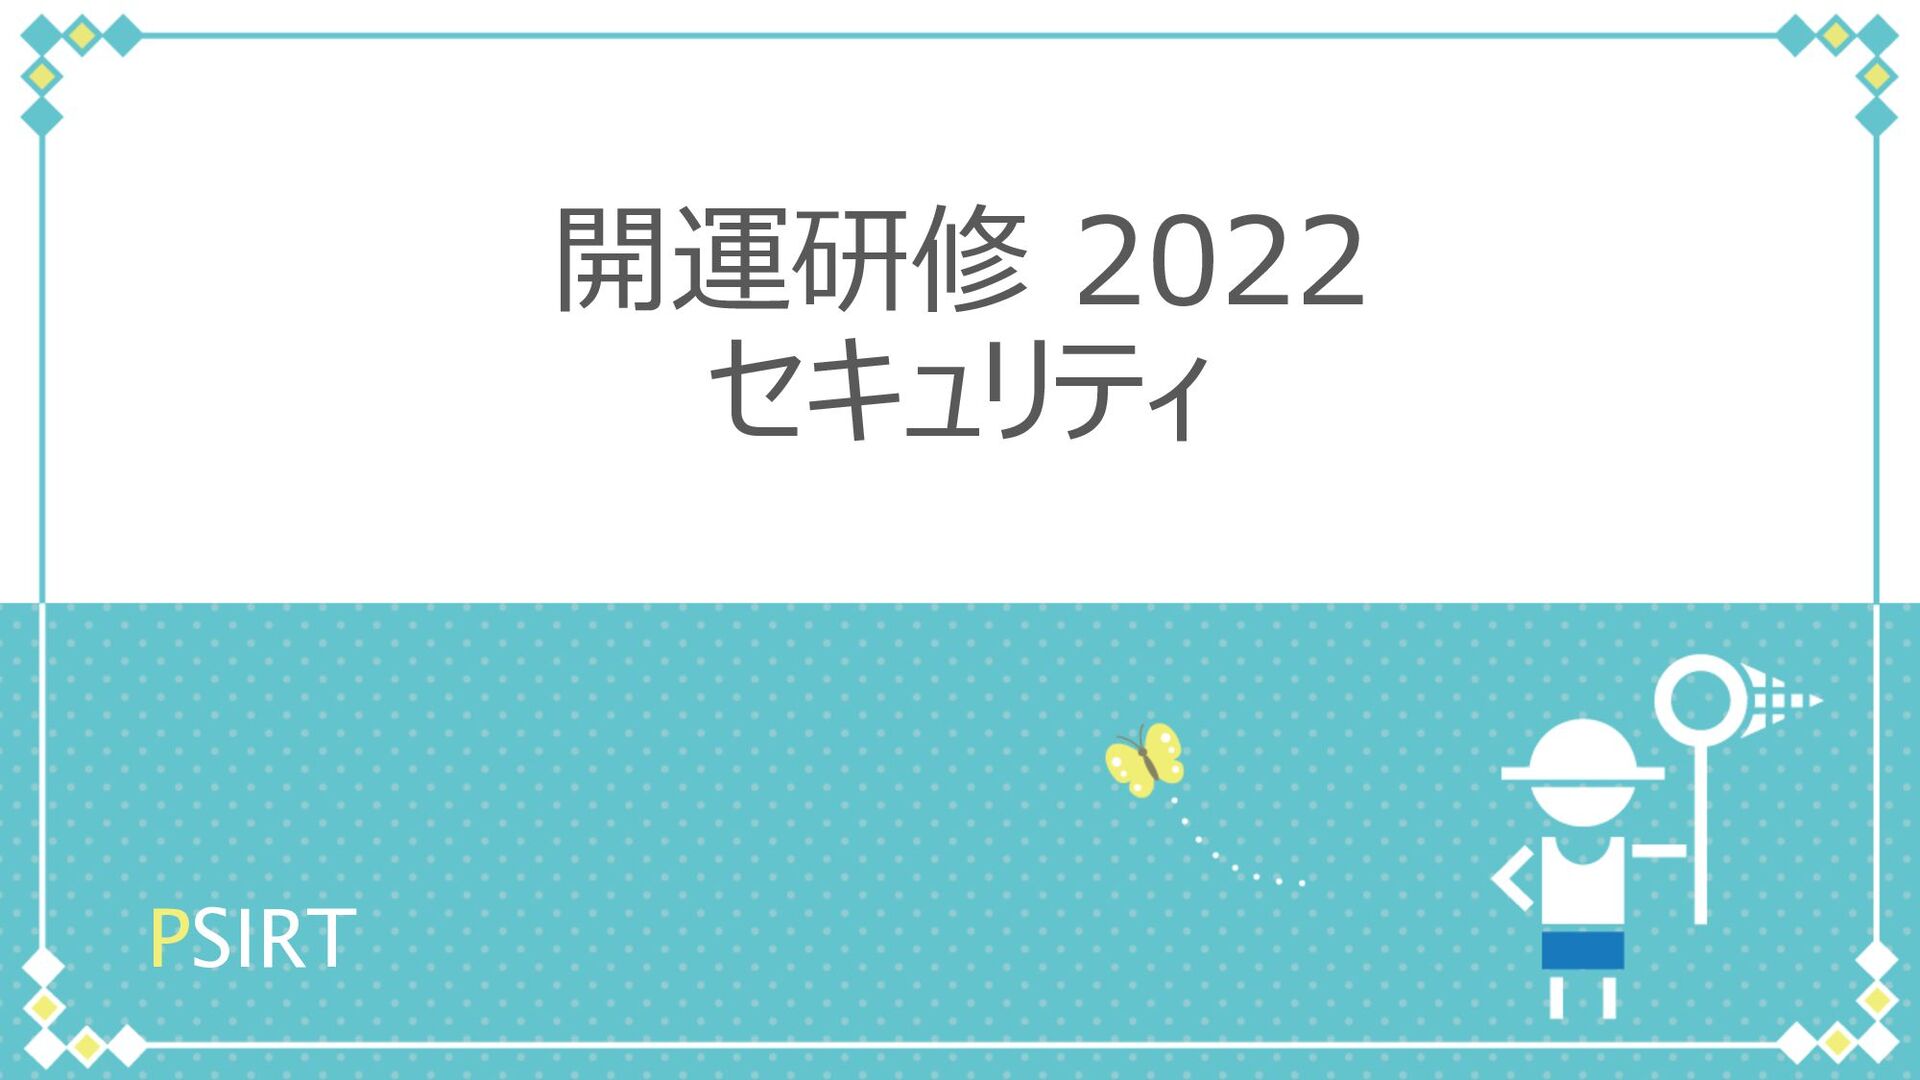 Slide Top: セキュリティ 開運研修2022 / security 2022